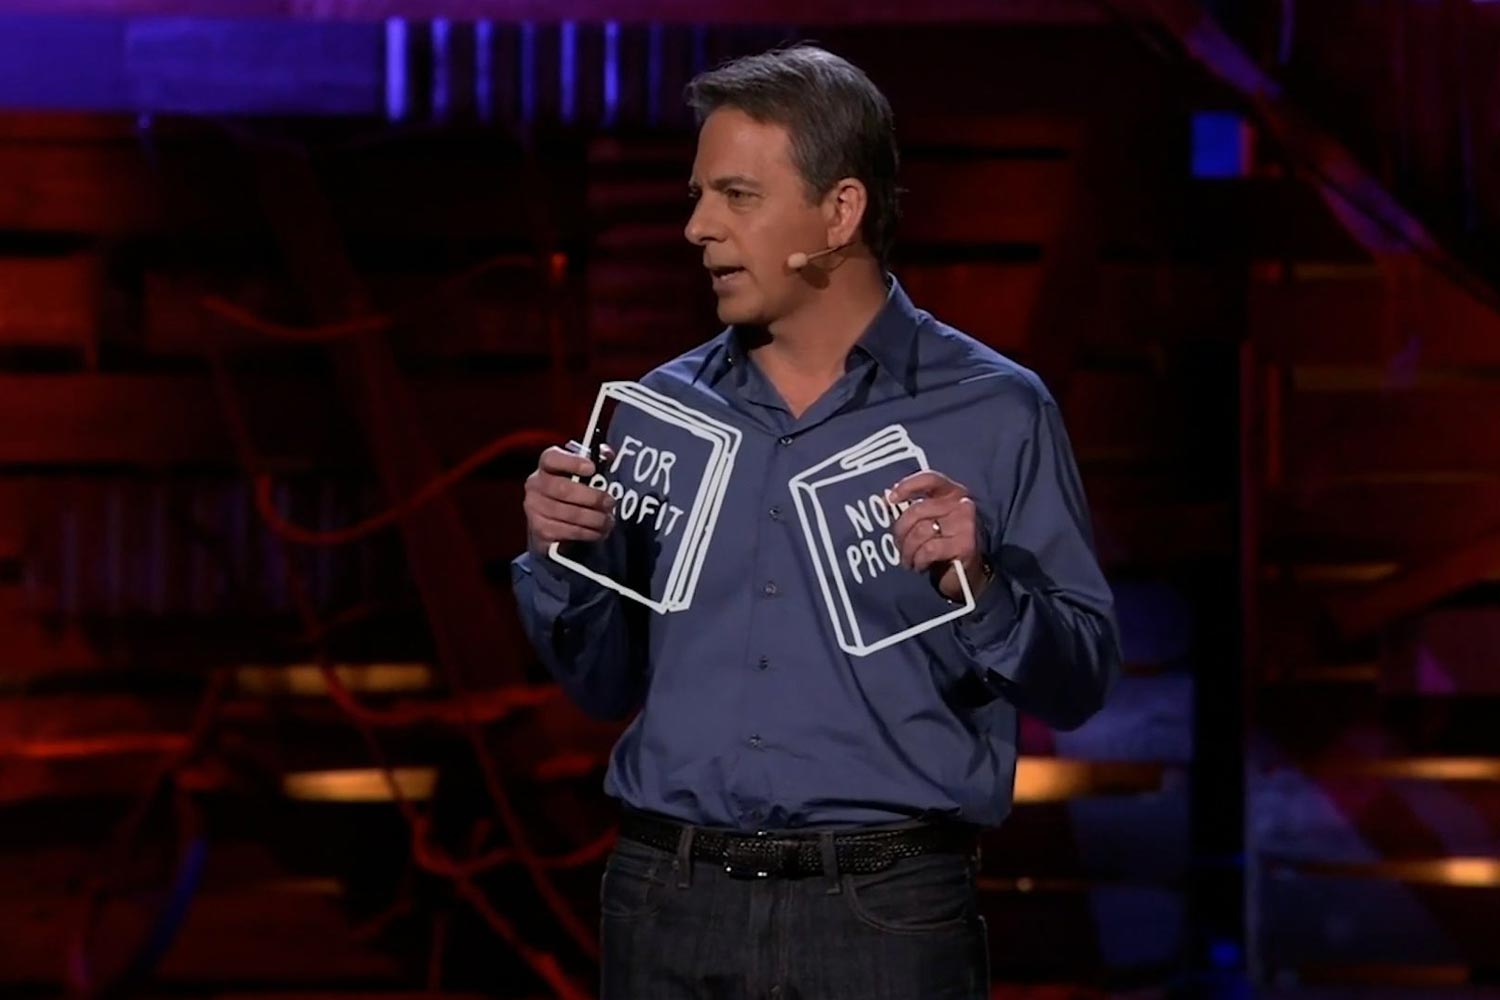 Dan Pallotta gives a TED Talk. Two books are animated into his hands, one titled For Profit, the other titled Non Profit